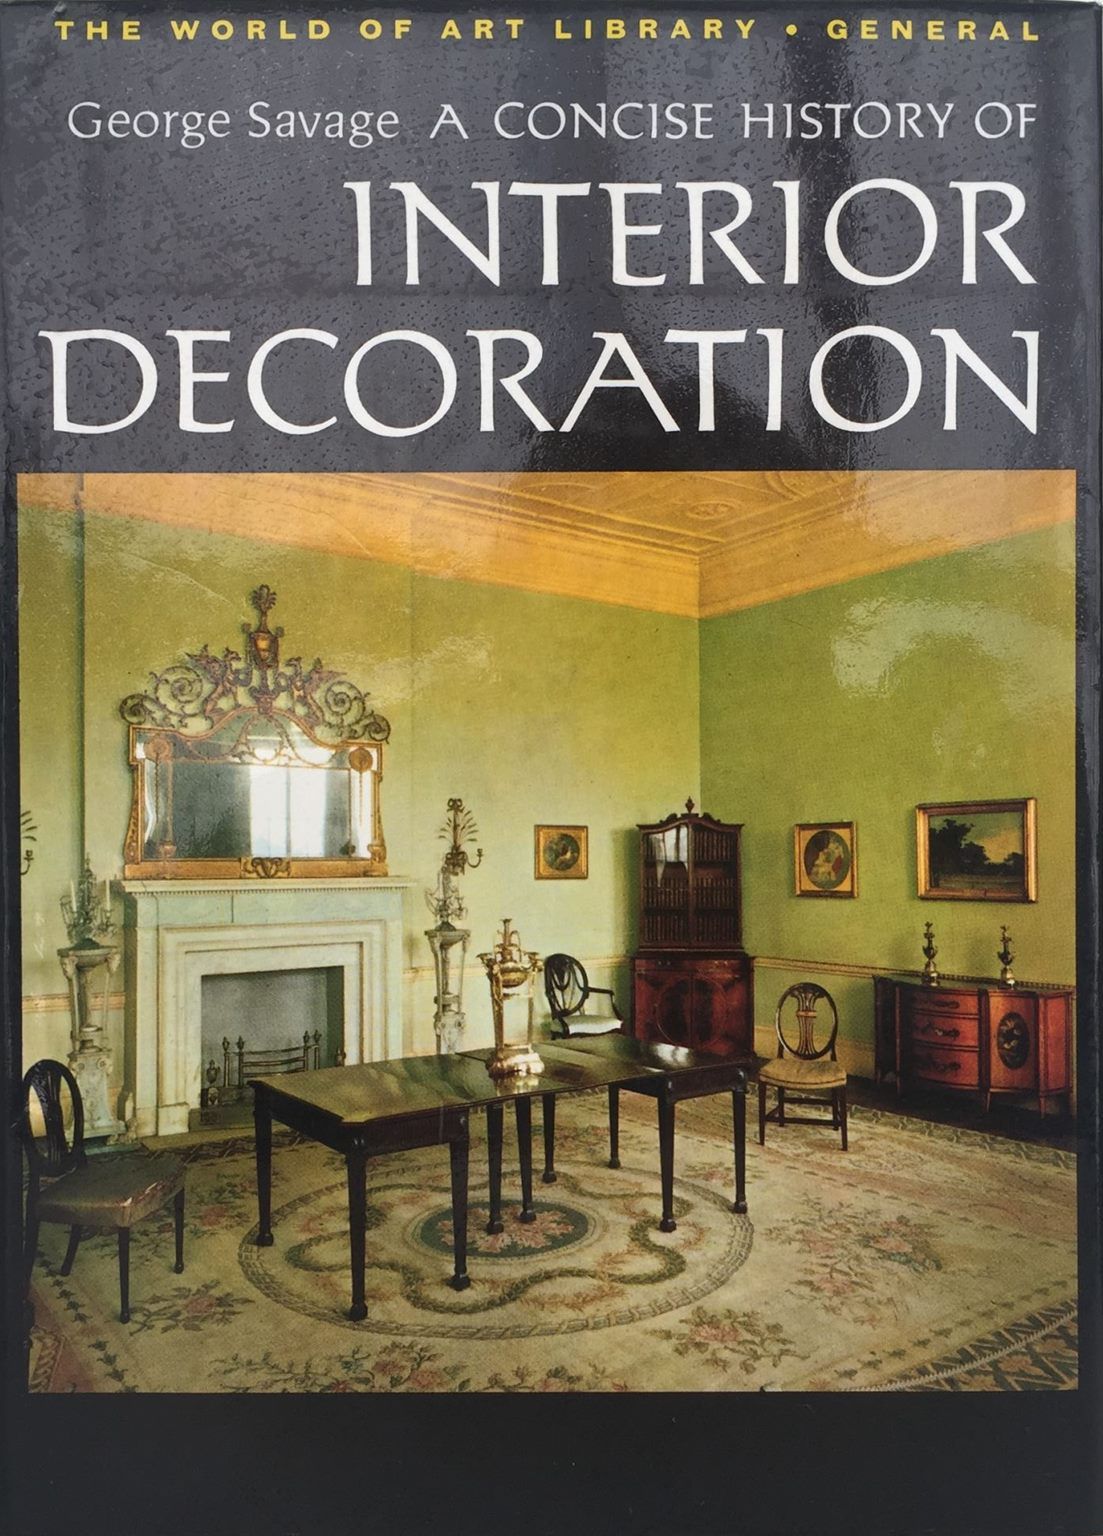 A CONCISE HISTORY OF INTERIOR DECORATION